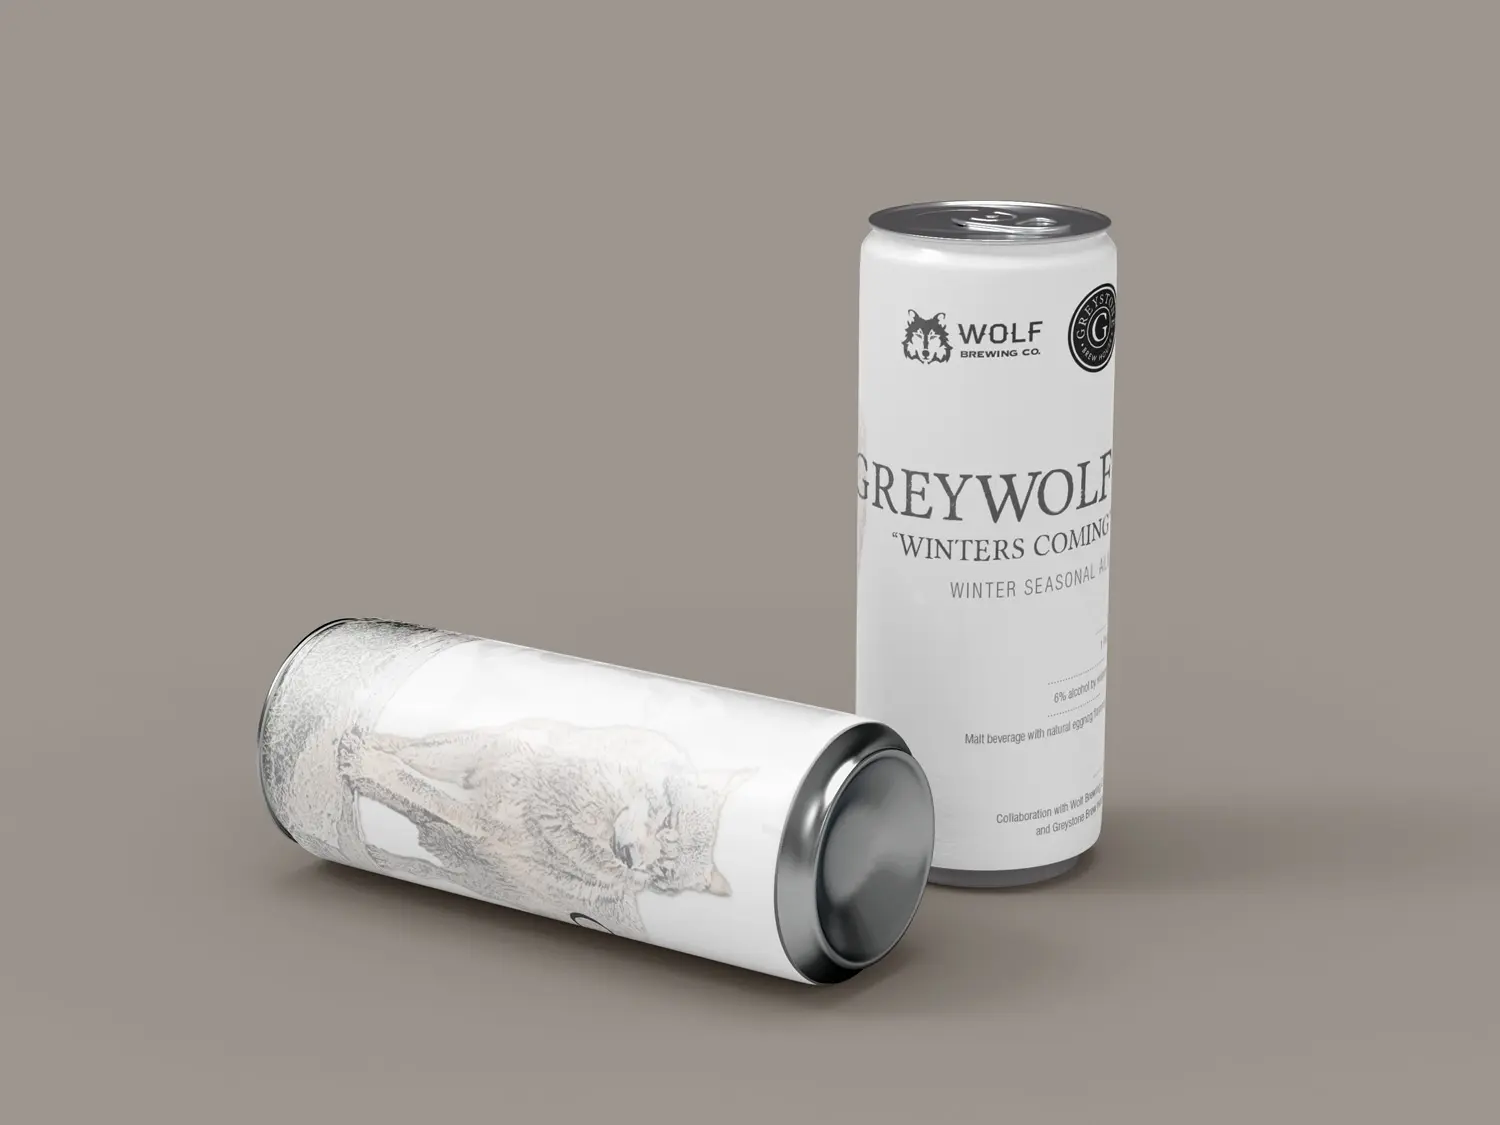 Greystone Greywolf "Winter's Coming" Multiple Cans